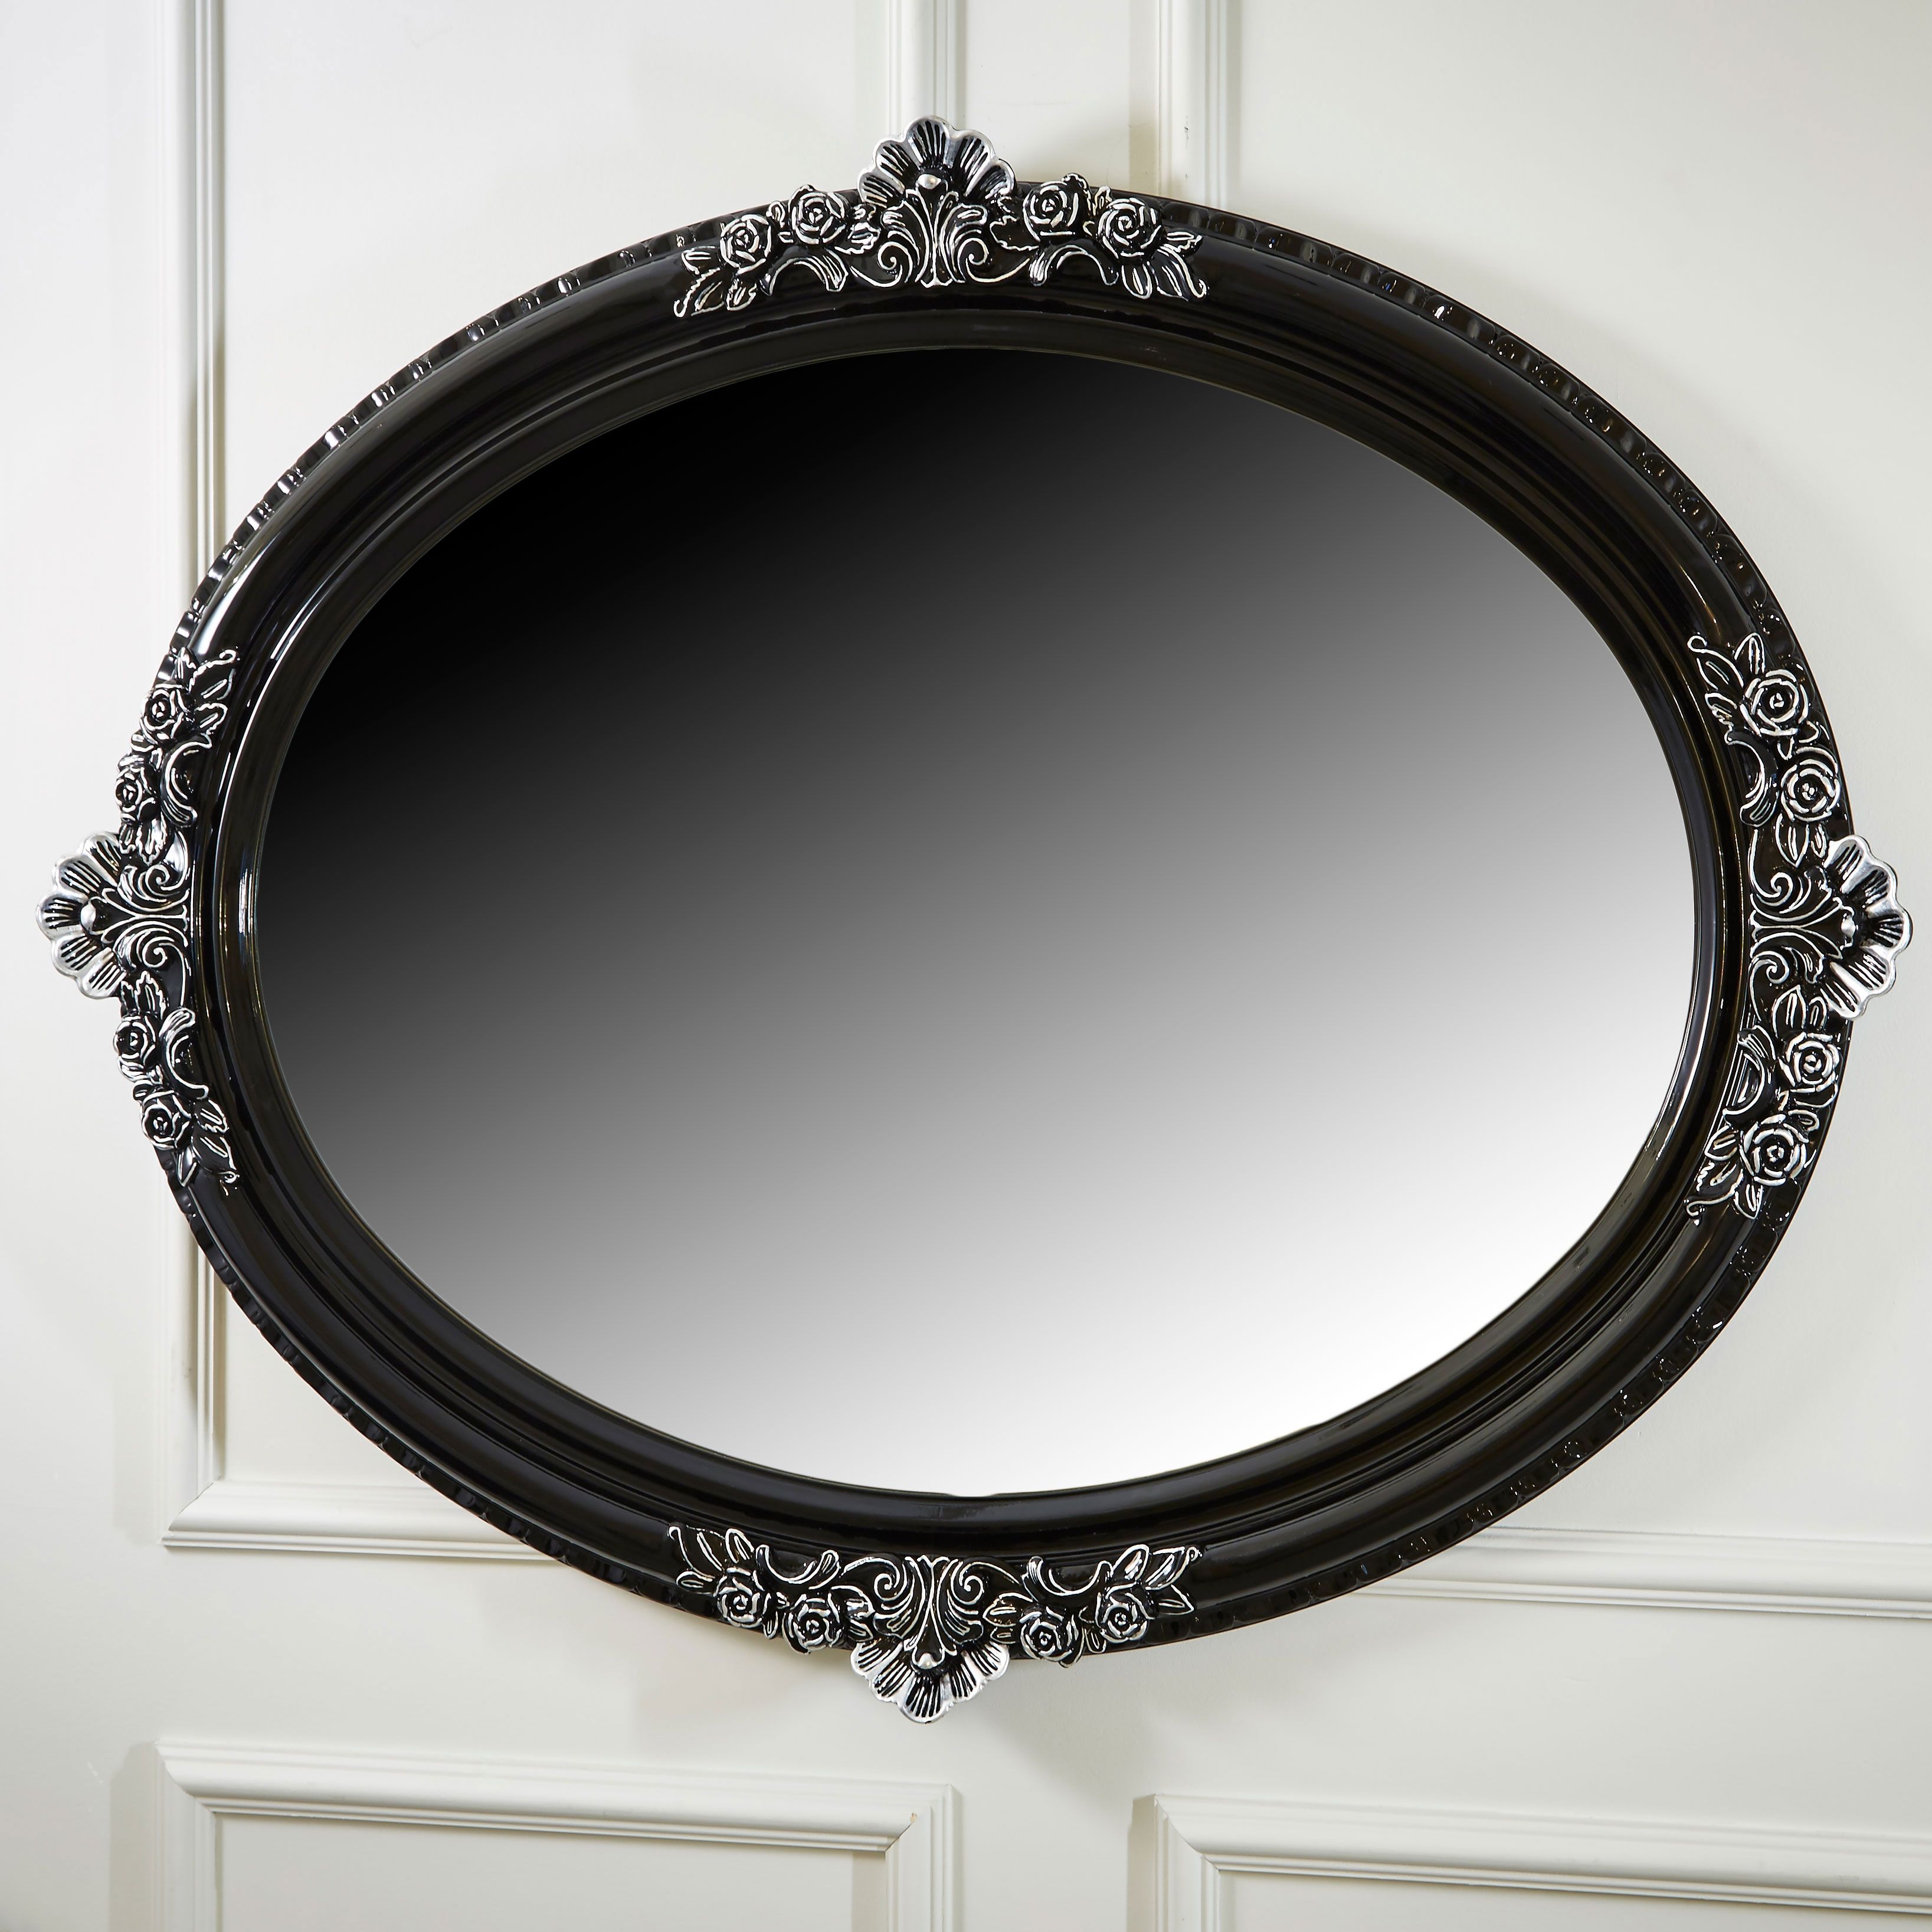 Ornate High Gloss Black Oval Mirror Juliettes Interiors With Black Oval Mirror (View 9 of 15)